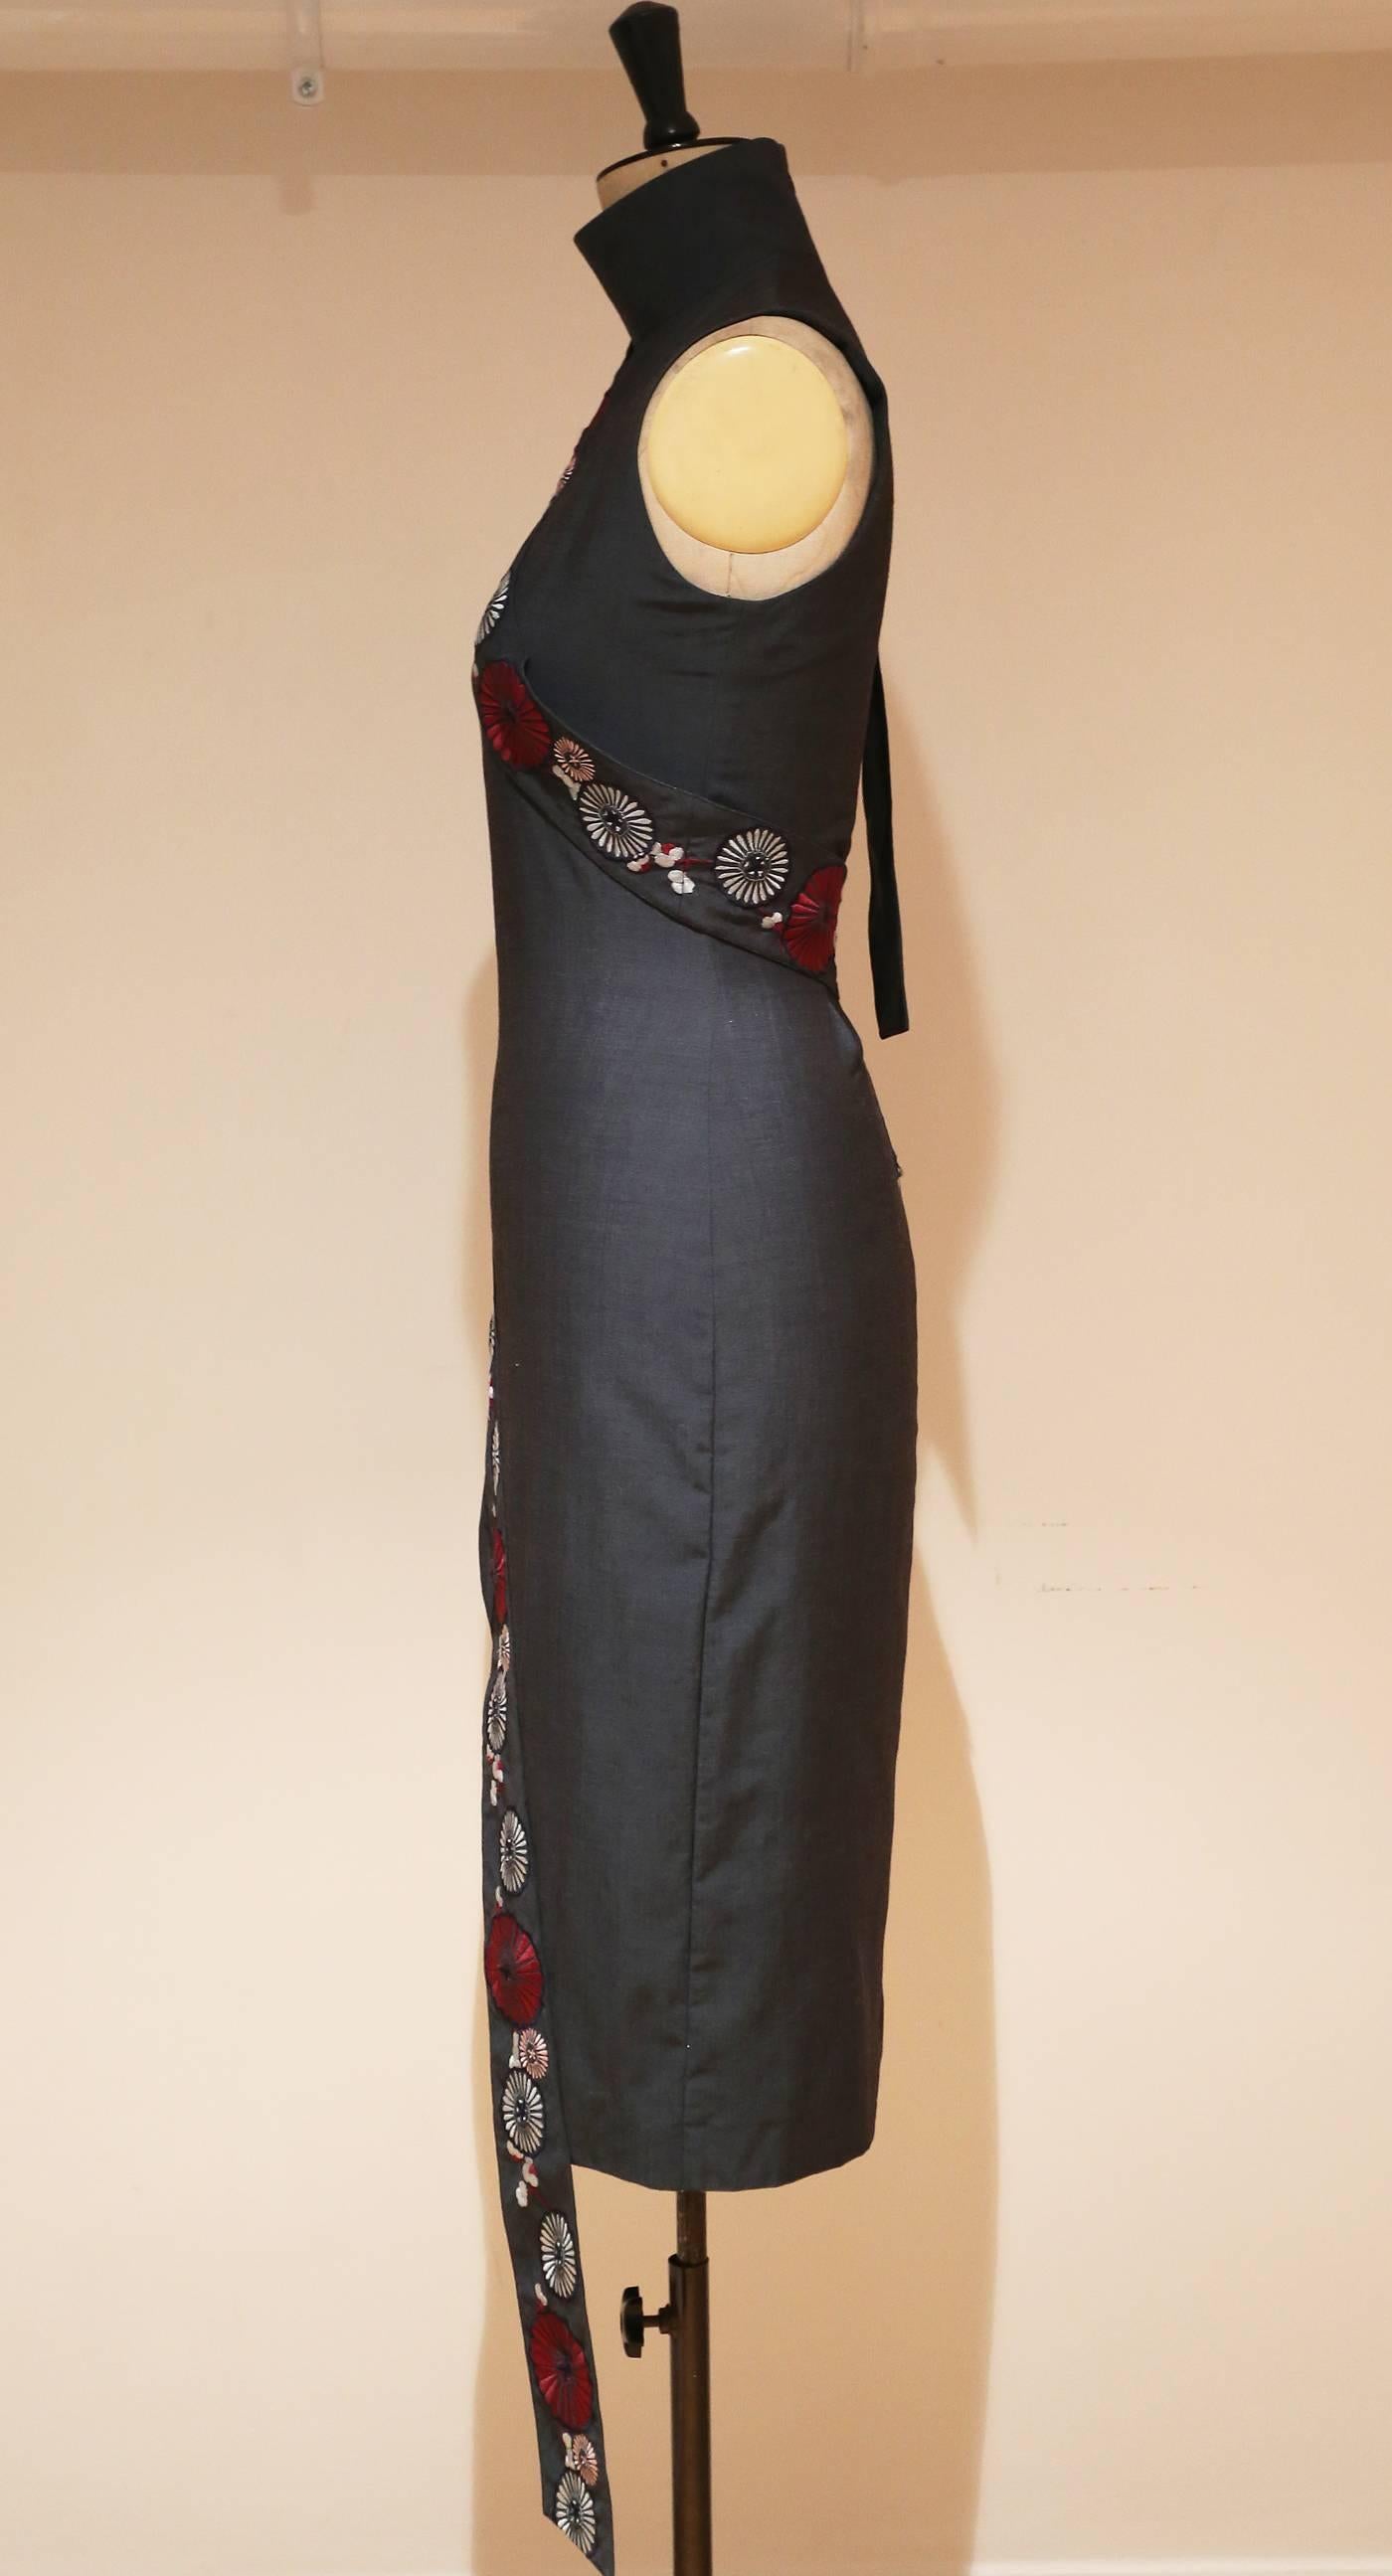 Highly sought after and rare Alexander McQueen VOSS dress from arguably his most iconic collection, Spring/Summer 2001. The dress is in a grey wool and inspired by an cheongsam style dress. 

European 40  Italian 38  UK 12 